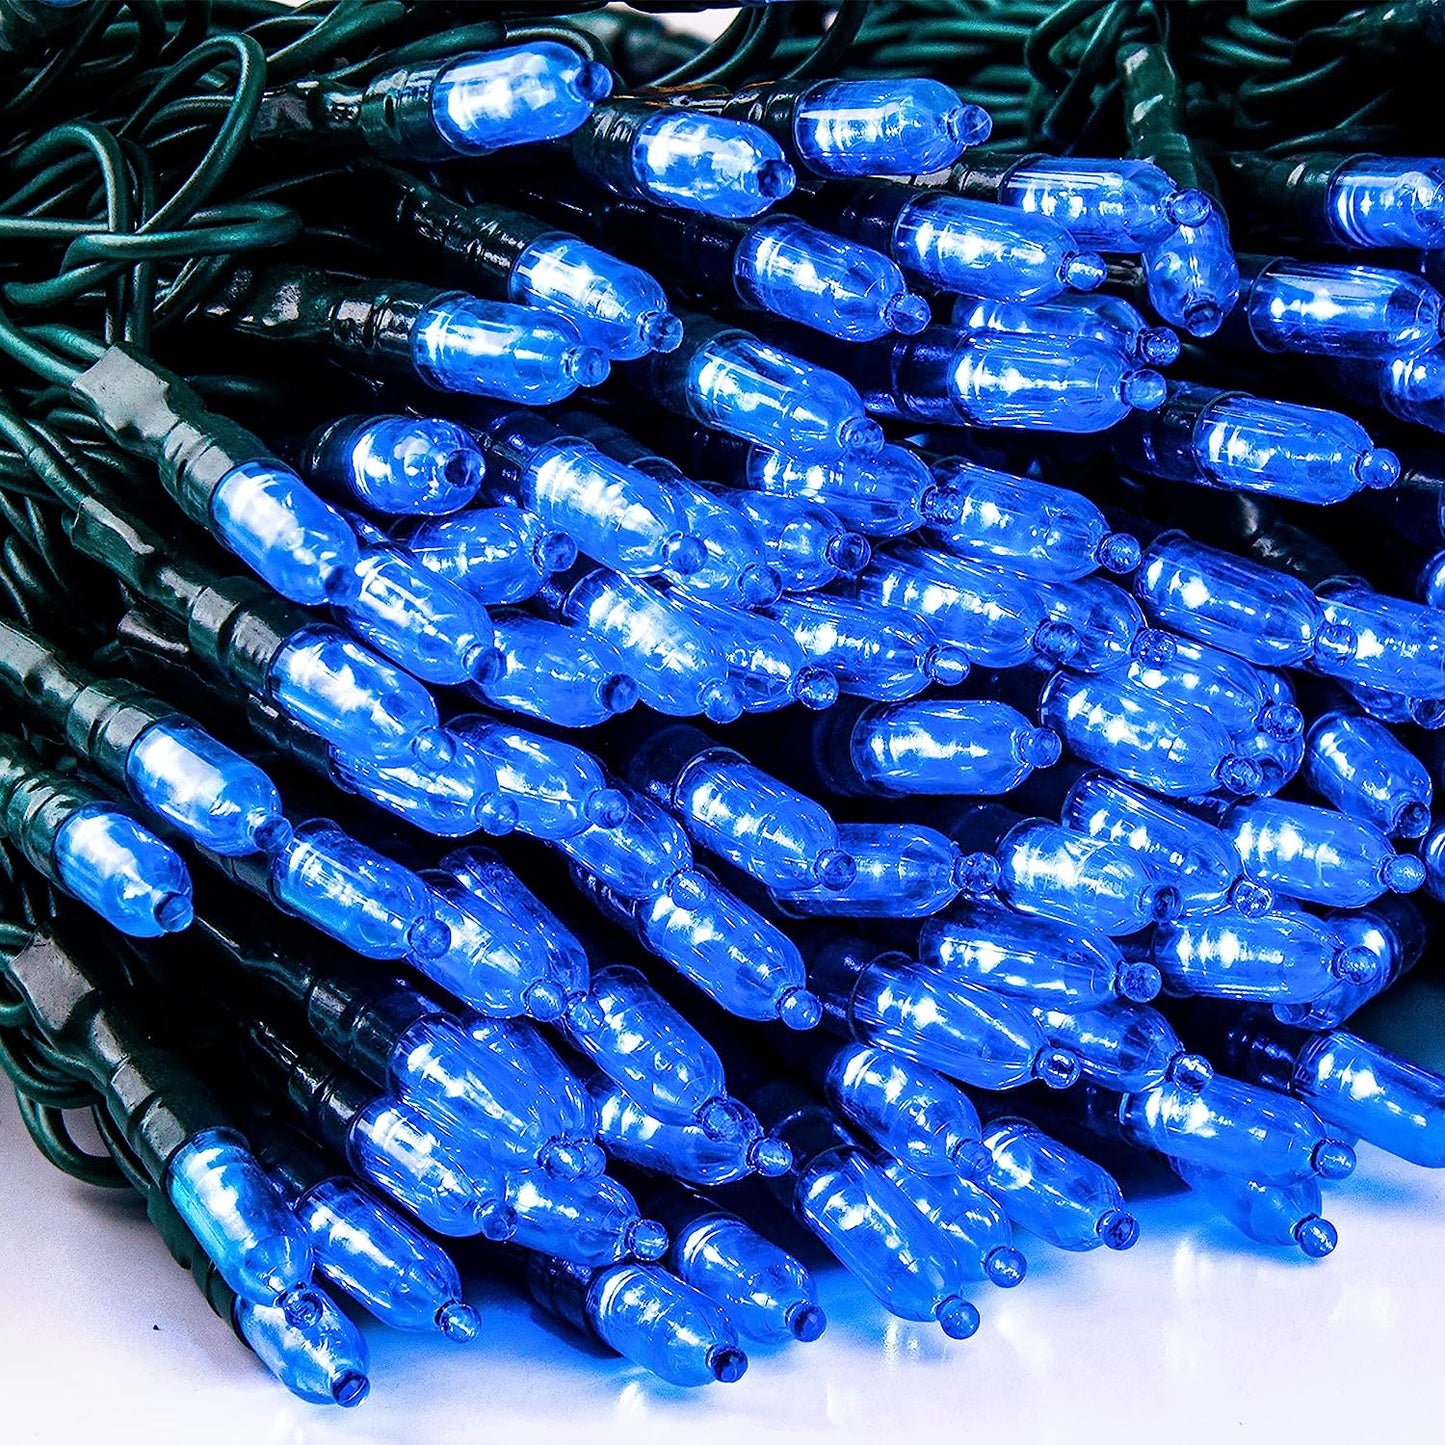 3 Set of 100 Count Blue LED Green Wire String Lights